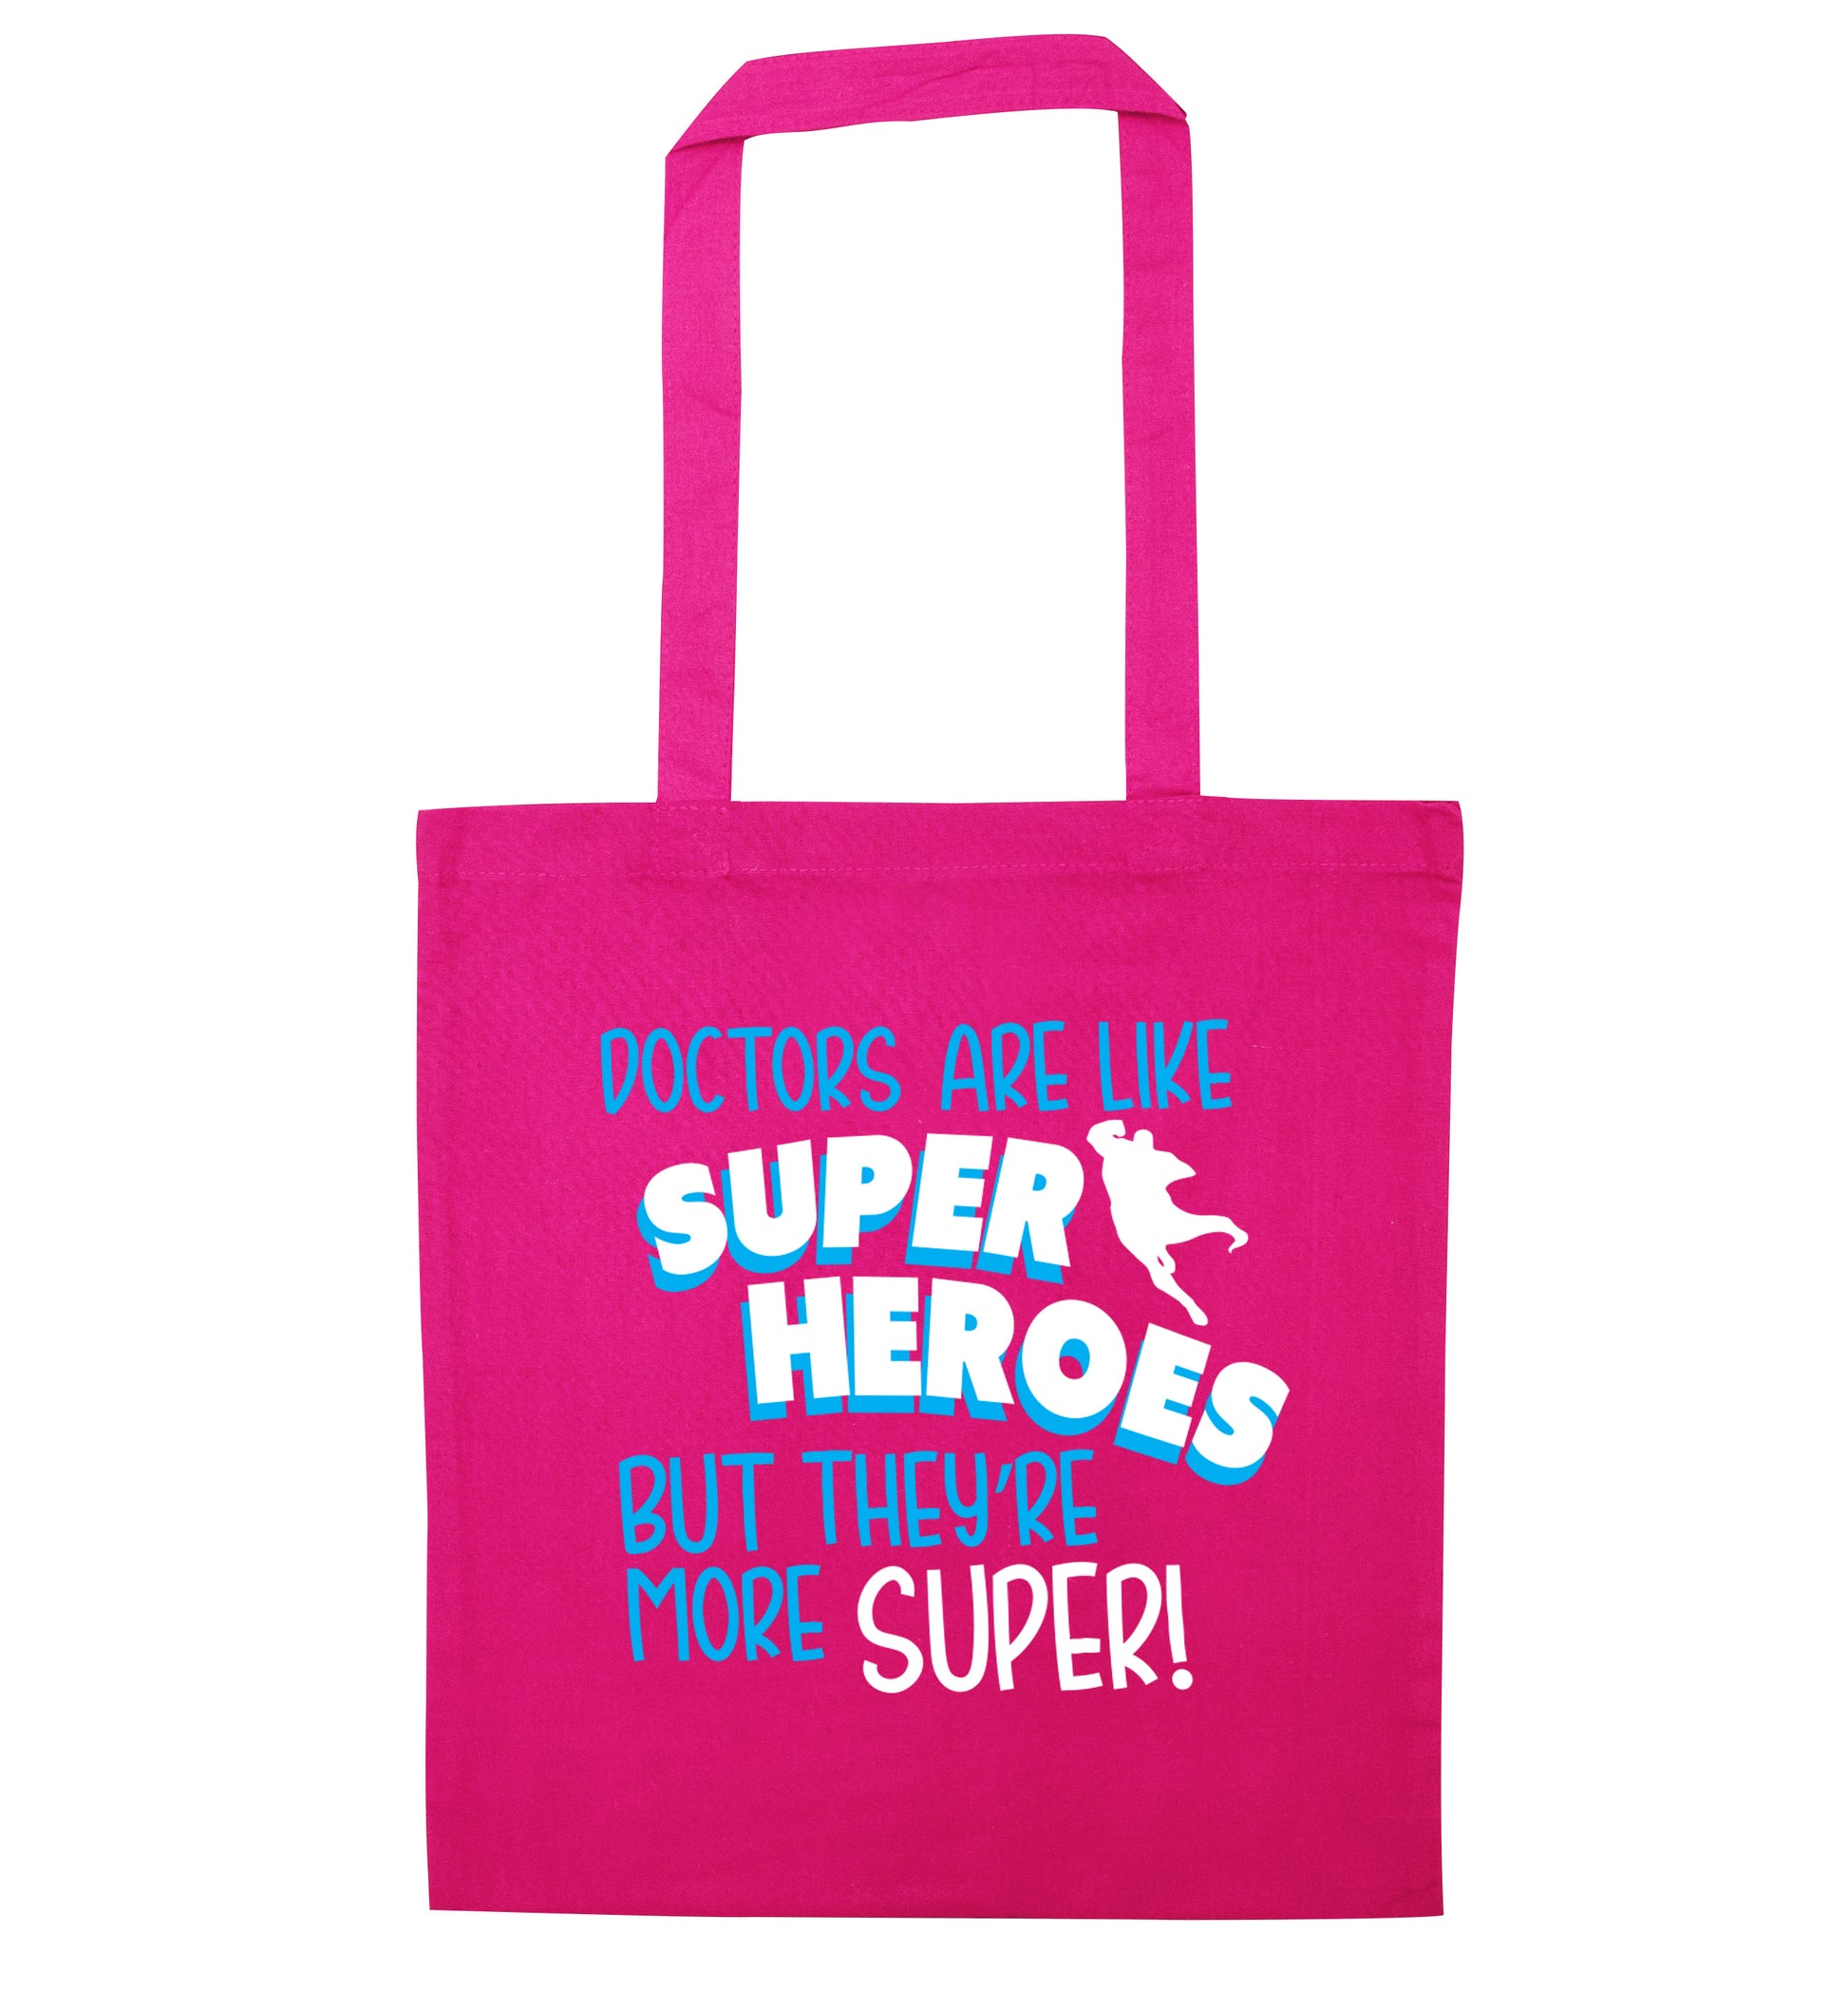 Doctors are like superheros but they're more super pink tote bag